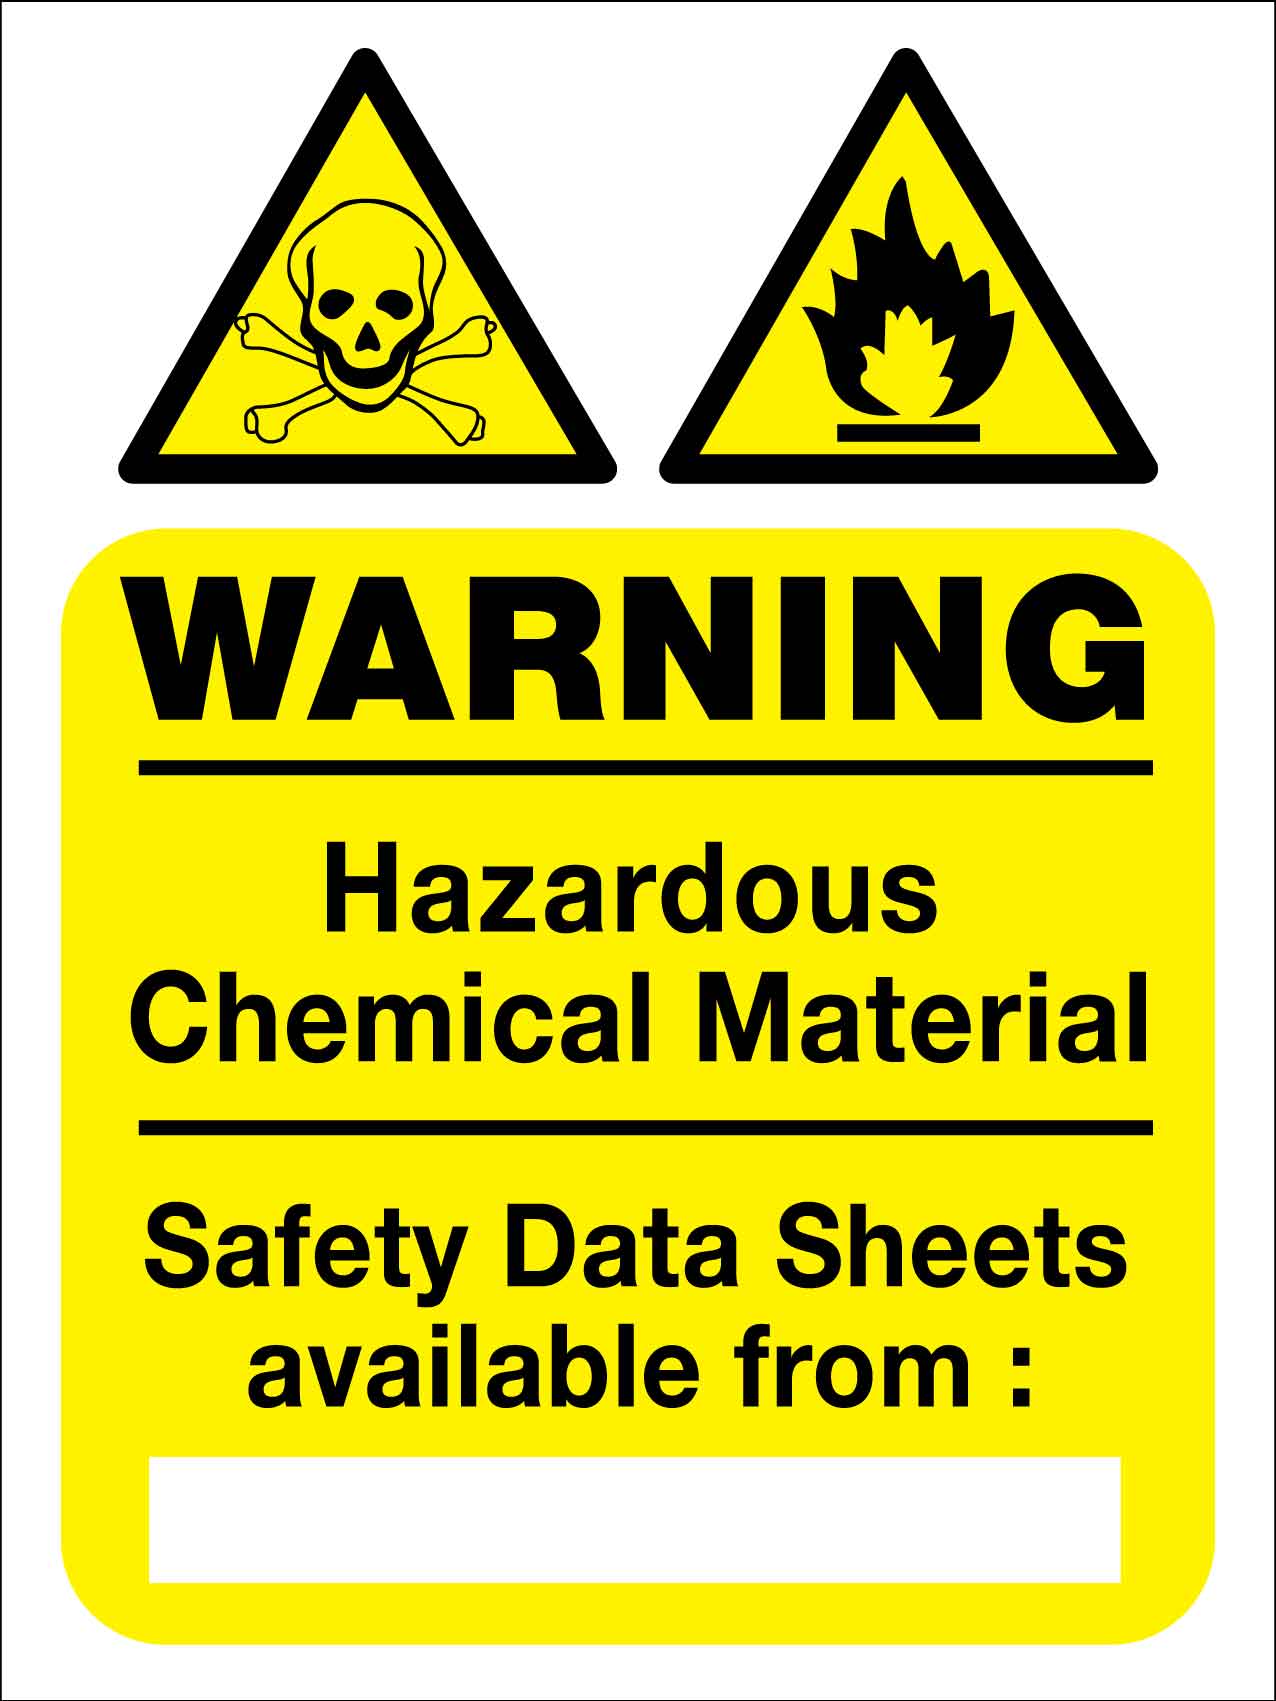 Warning Hazardous Chemical Material Safety Data Sheets Sign